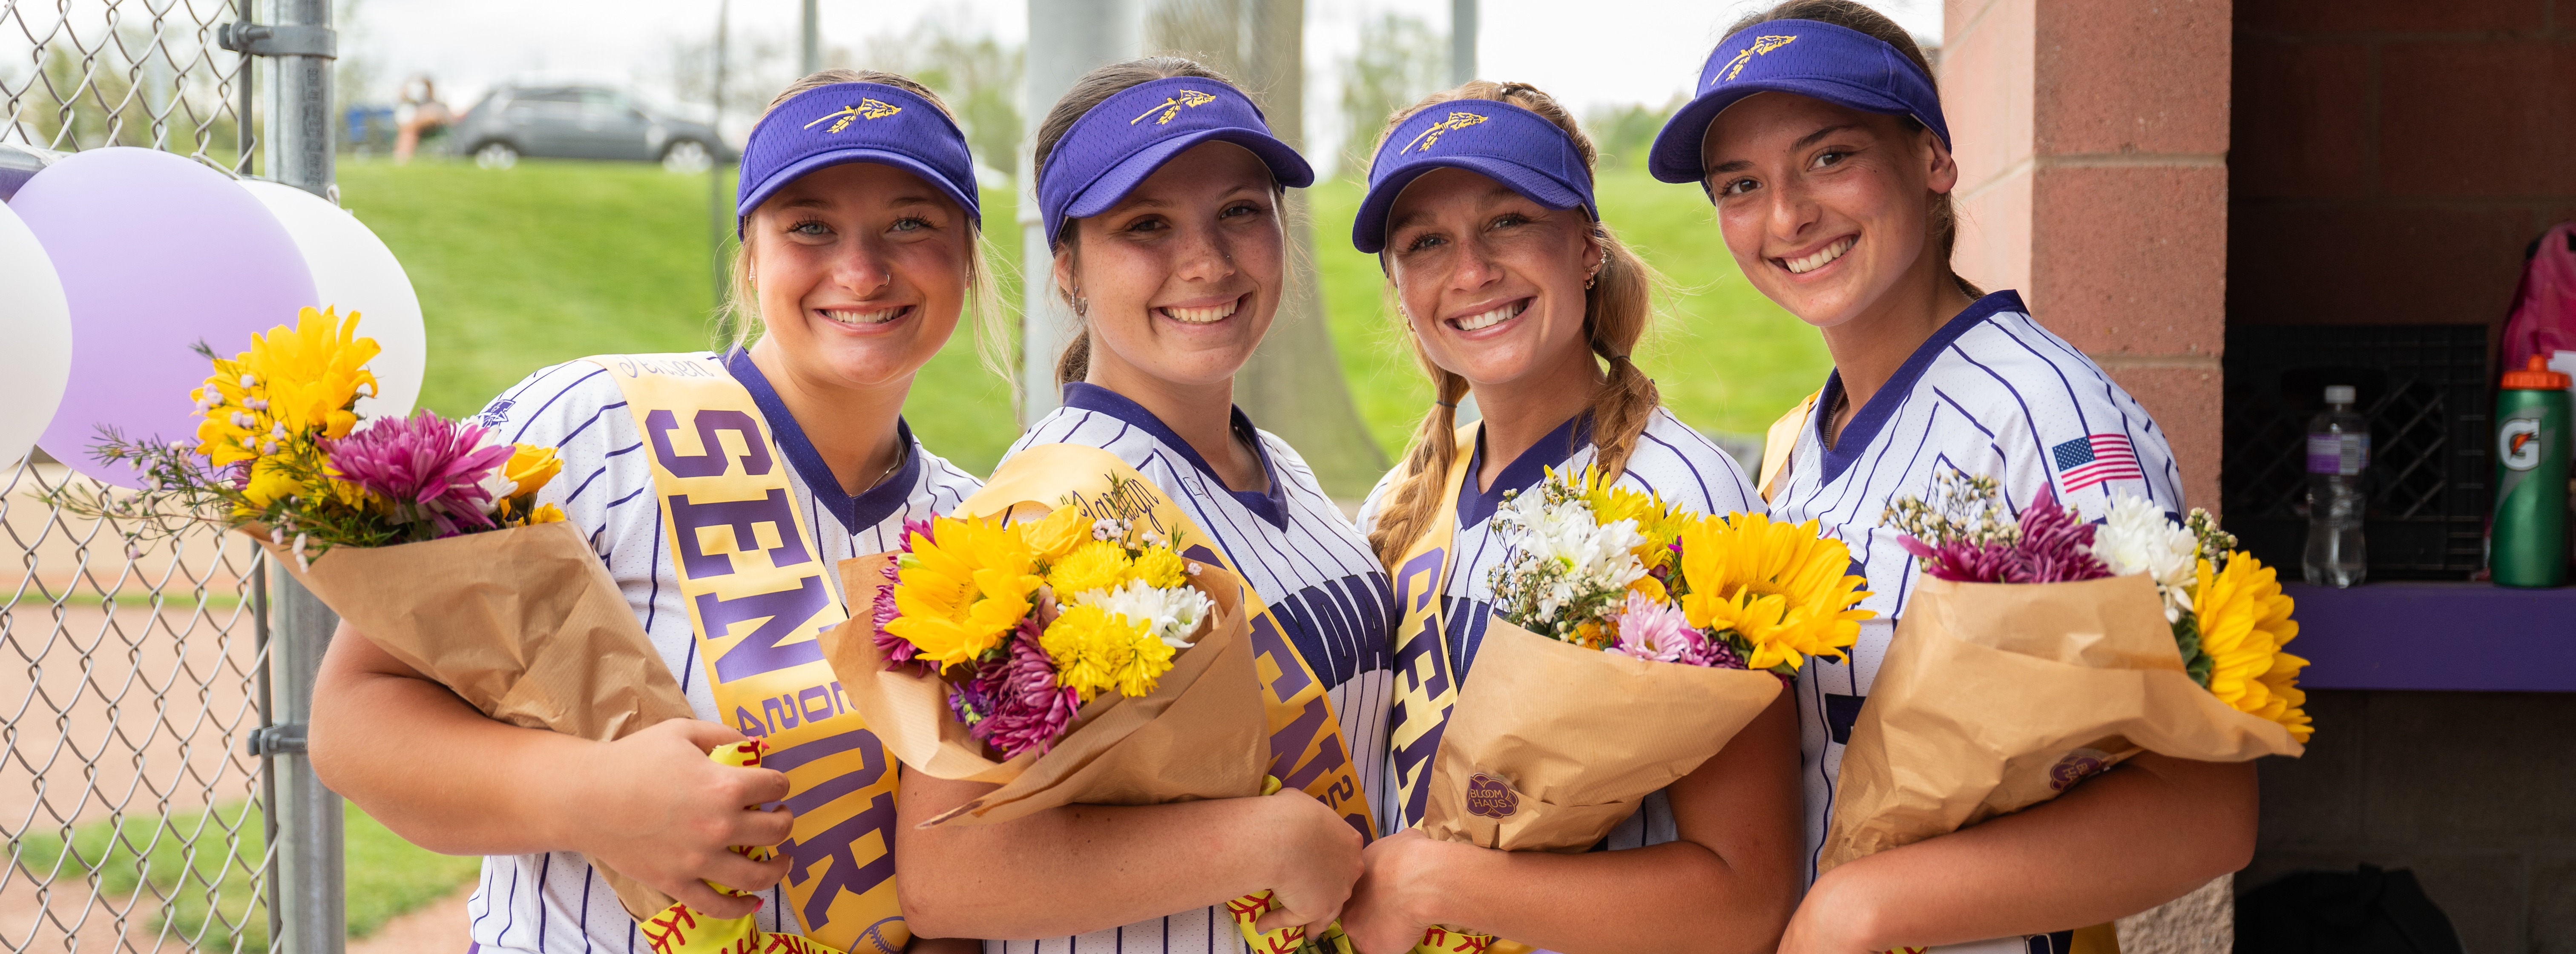 Girls Softball Senior Recognition Picture With Flowers